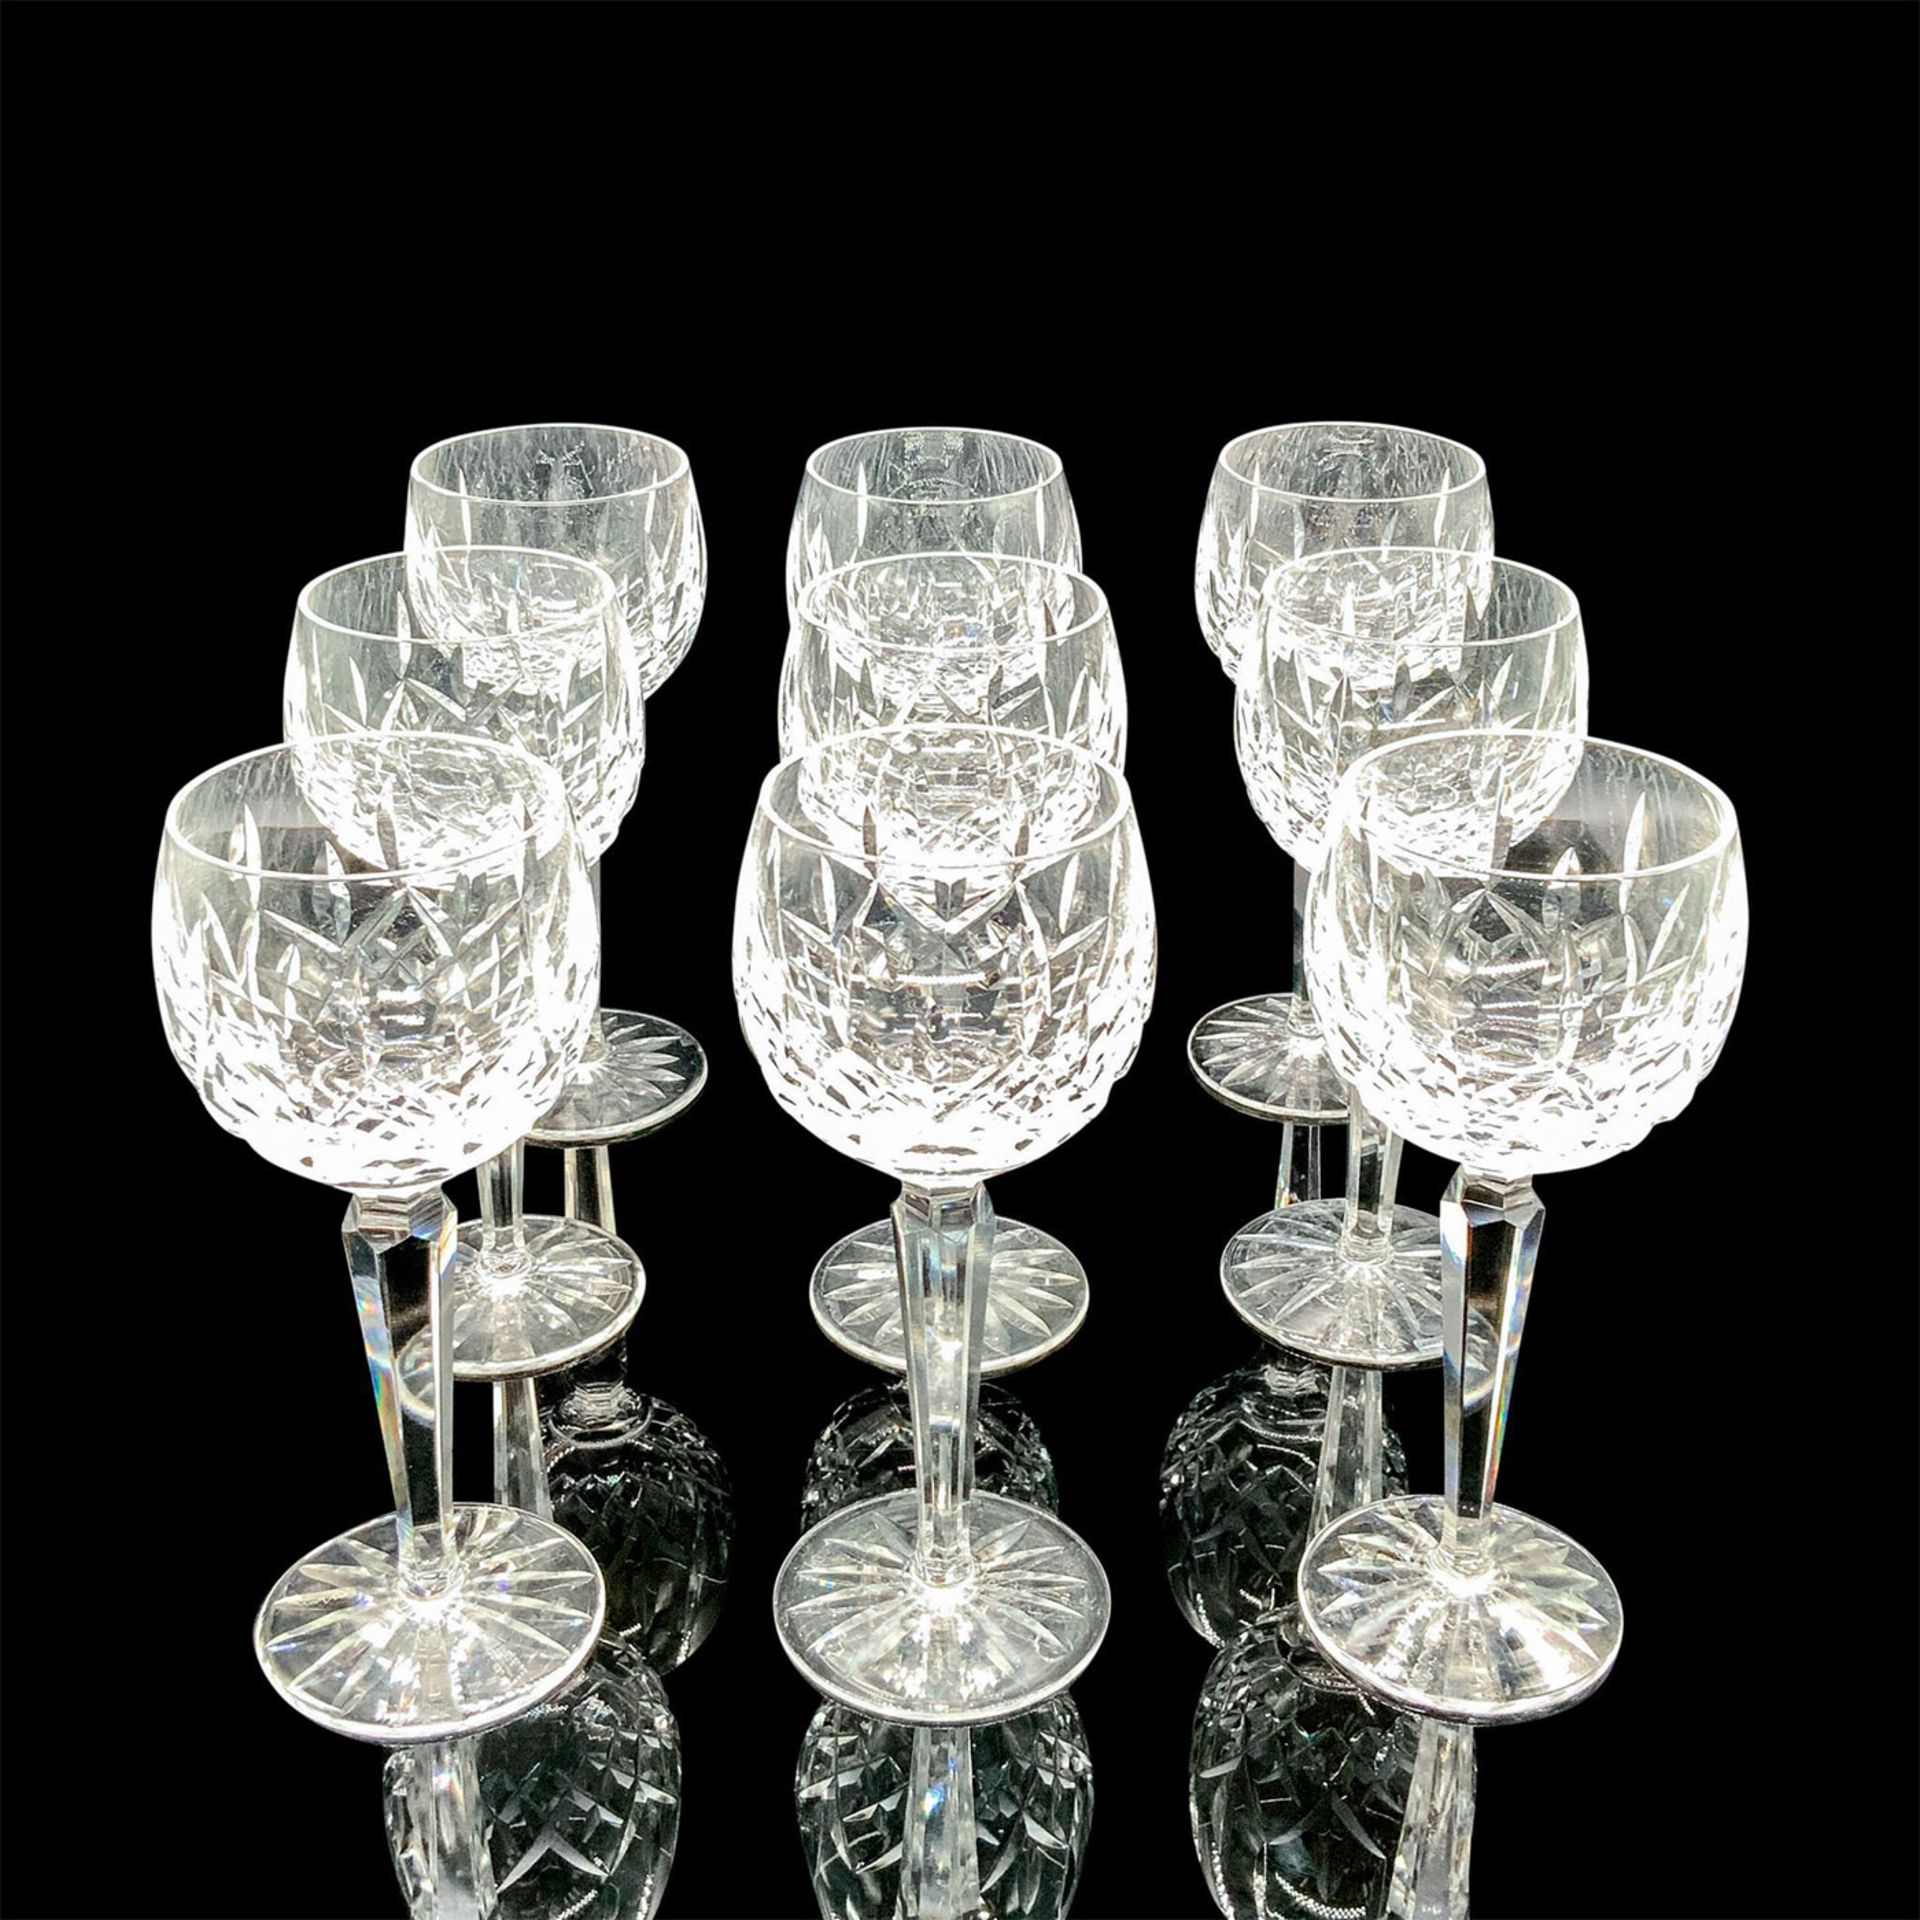 9pc Waterford Lismore Crystal Wine Glasses - Image 3 of 4